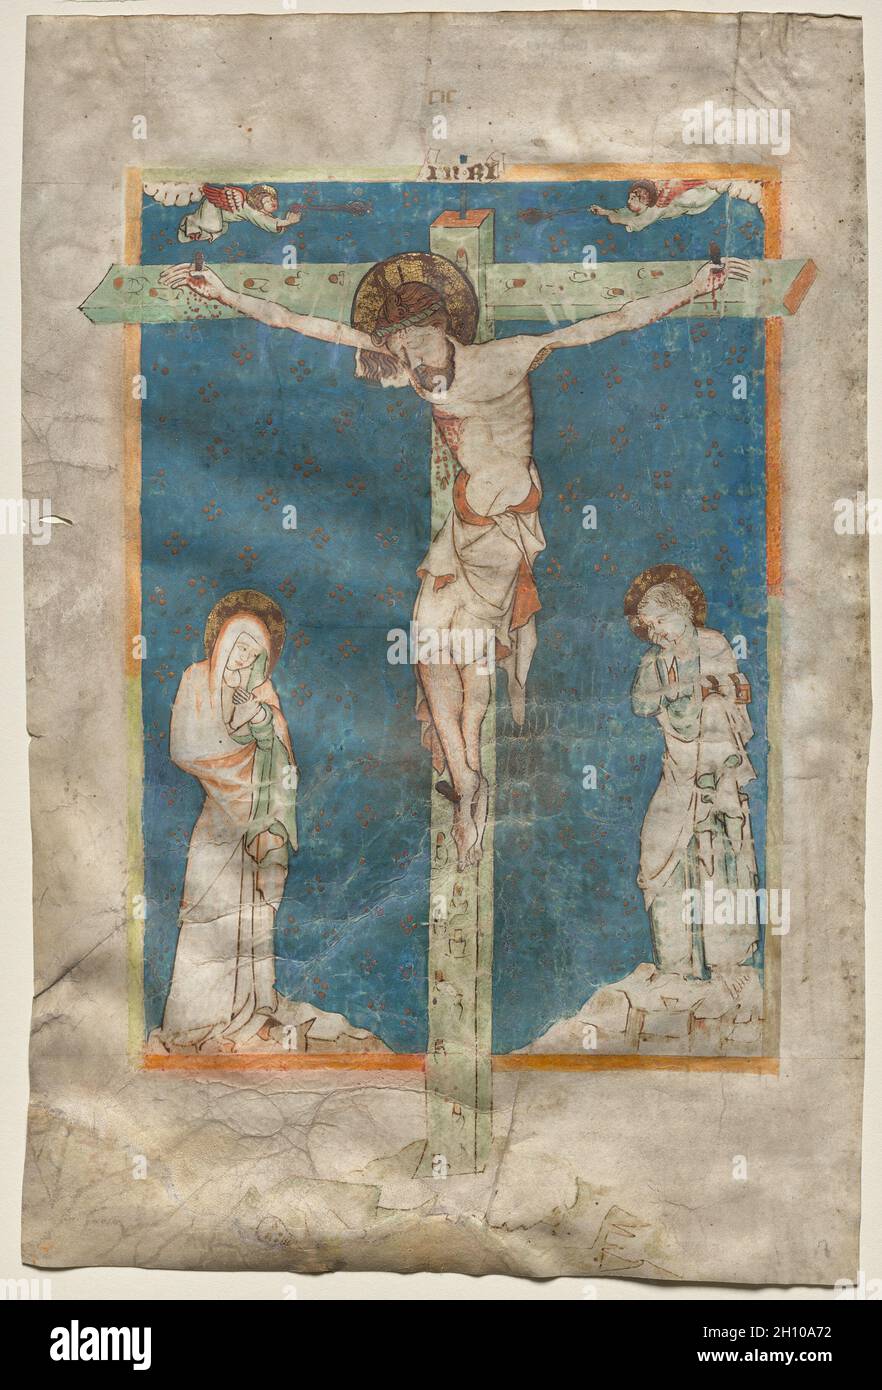 Leaf from a Missal: The Crucifixion (recto), c. 1330-40. Bohemia. Ink, tempera, and gold leaf on parchment; sheet: 35.4 x 23.5 cm (13 15/16 x 9 1/4 in.).  The crucified Christ was a central theme of medieval visual art. Each period set its own artistic and iconographic priorities, depending on the function and context of the works. For example, the dead Christ with his head bowed, the side wound dripping with blood, and the richly designed loincloth is characteristic of the 1300s. This miniature is localized to Bohemia (present-day Czech Republic and Slovakia), with its capital, Prague, as a l Stock Photo